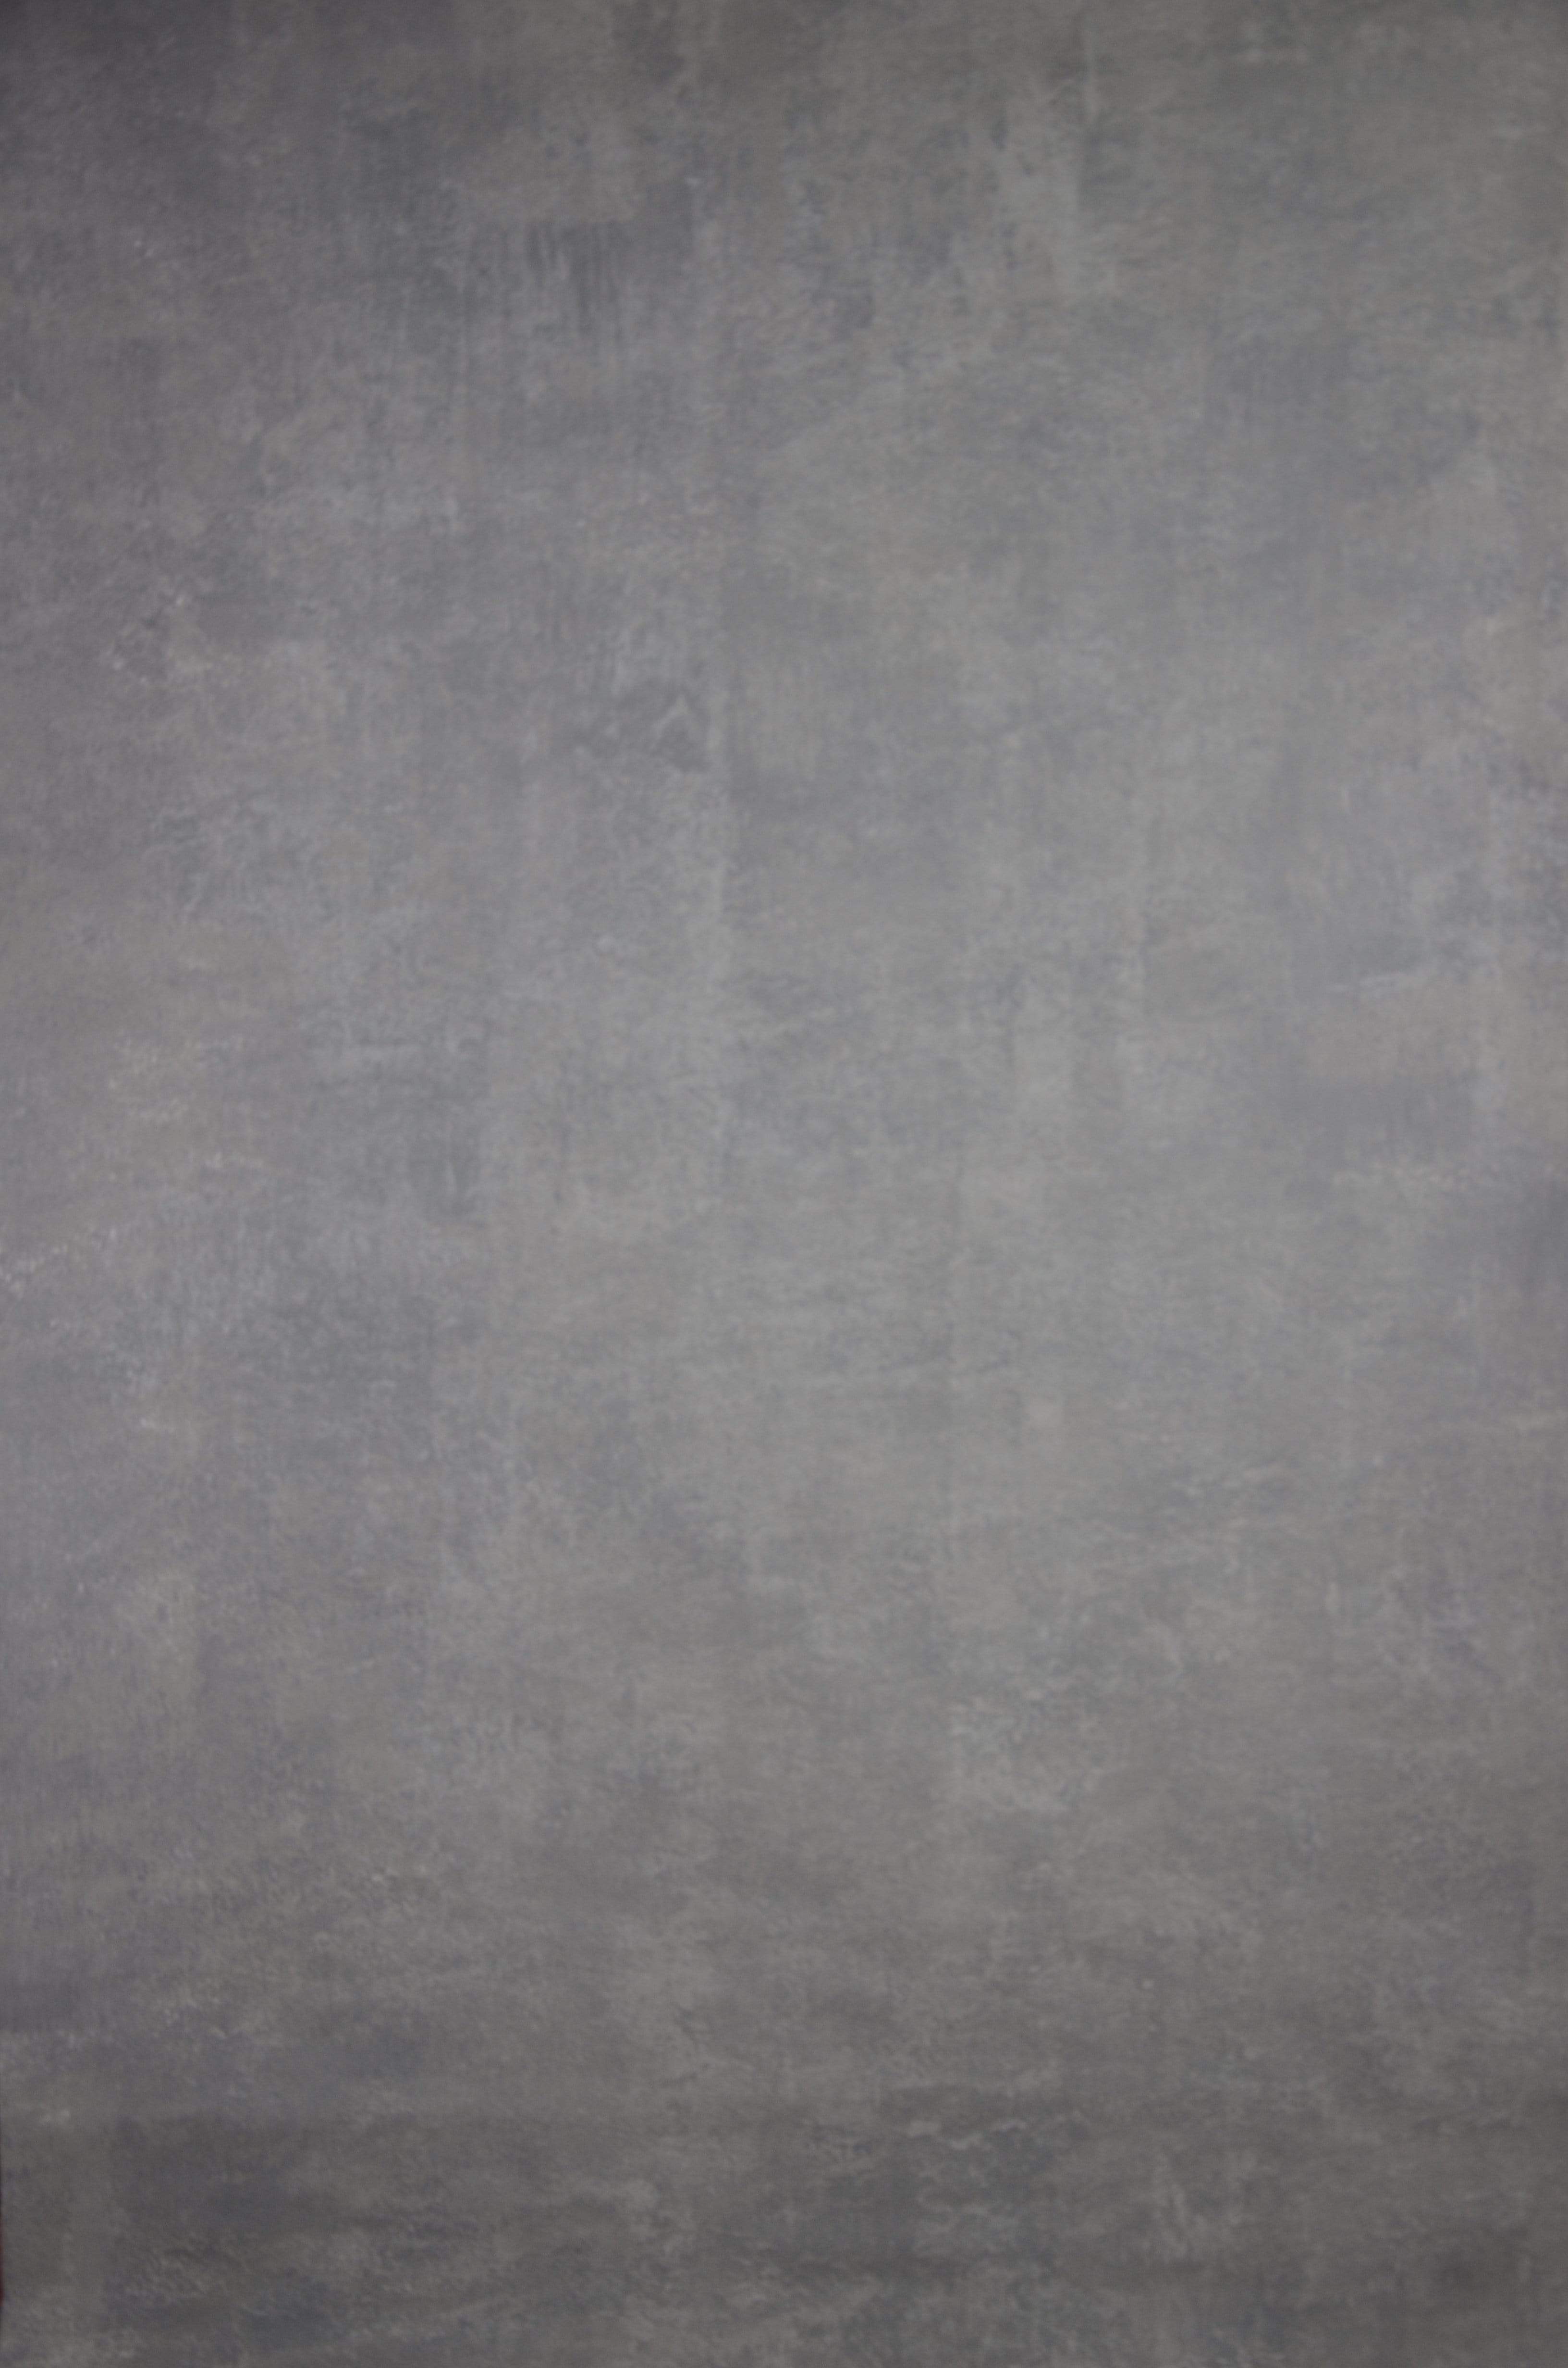 Katebackdrop£ºKate Hand Painted Cold Tones of Grey Abstract Texture Backdrops